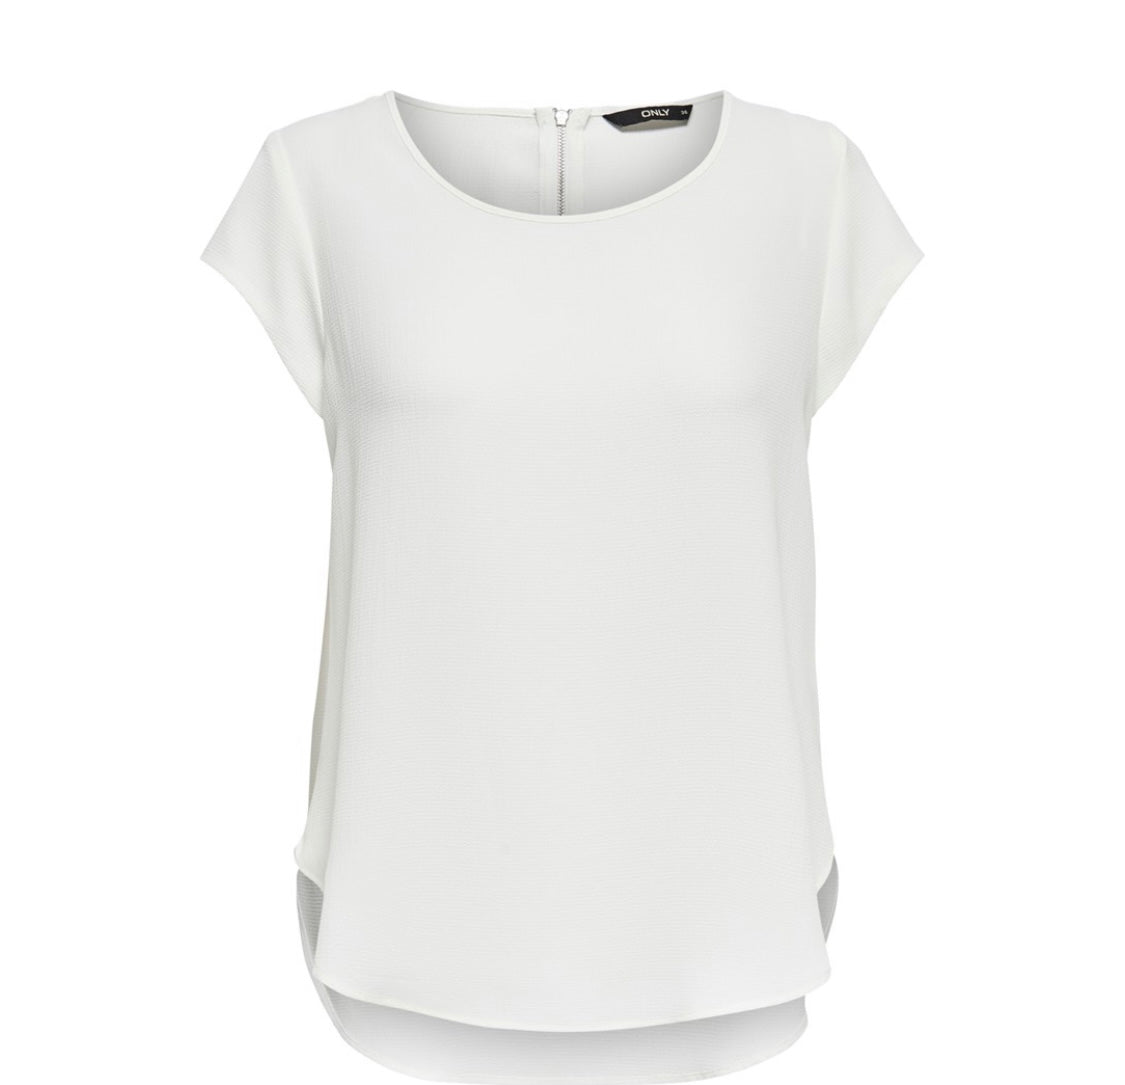 VIC TOP S/S WHITE